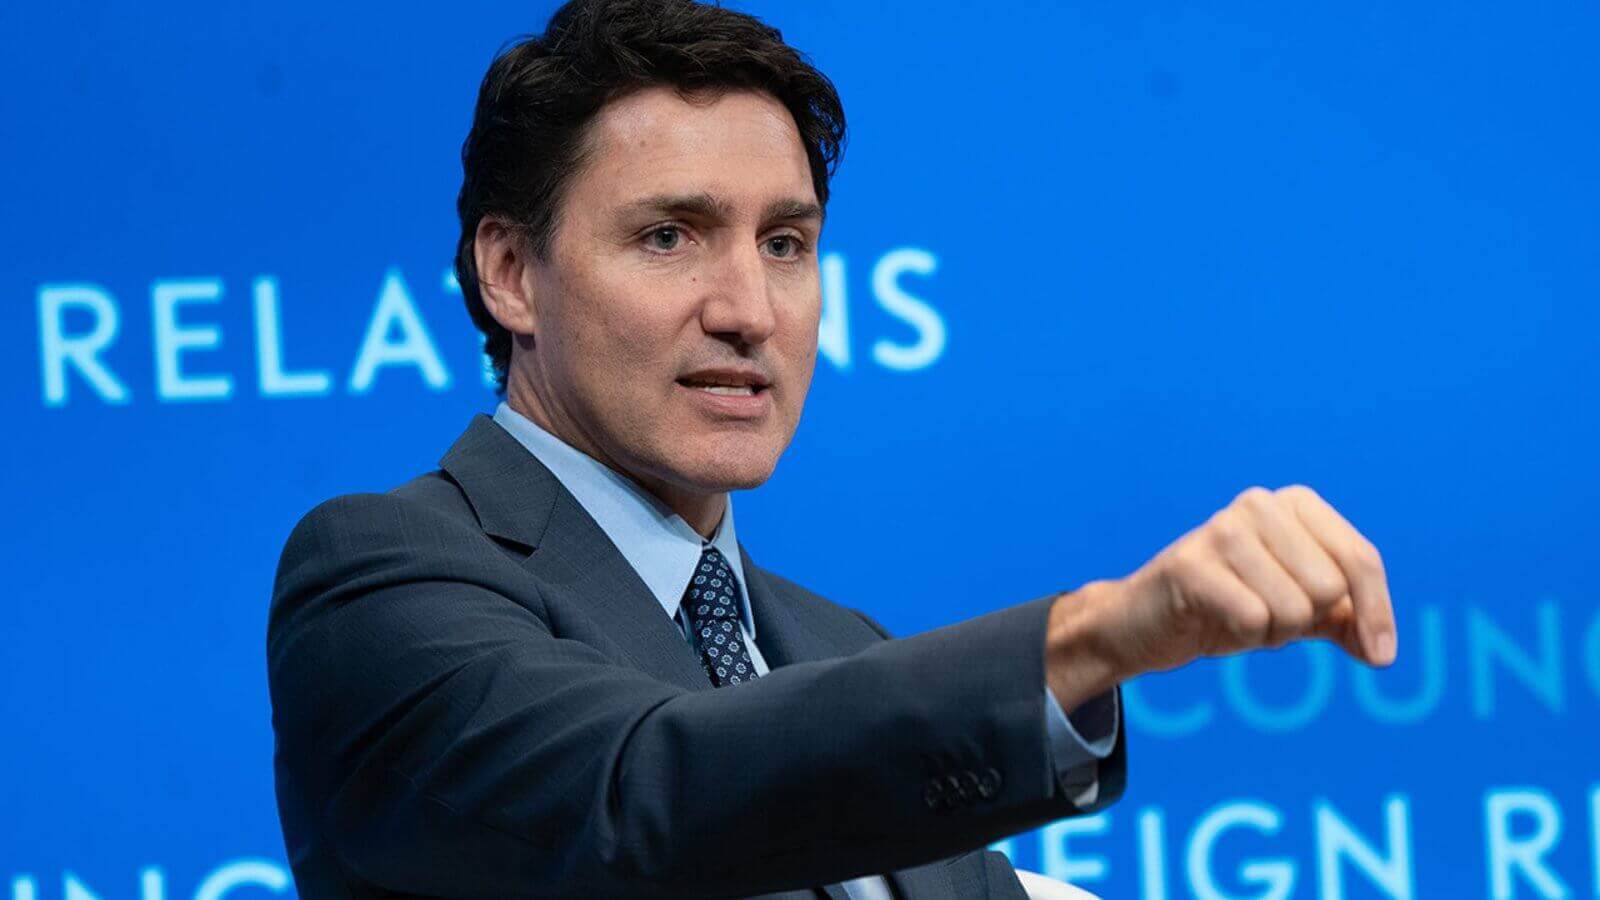 China Slams Canada’s PM Trudeau for “Slave Labour” Jibe, Warns of Consequences